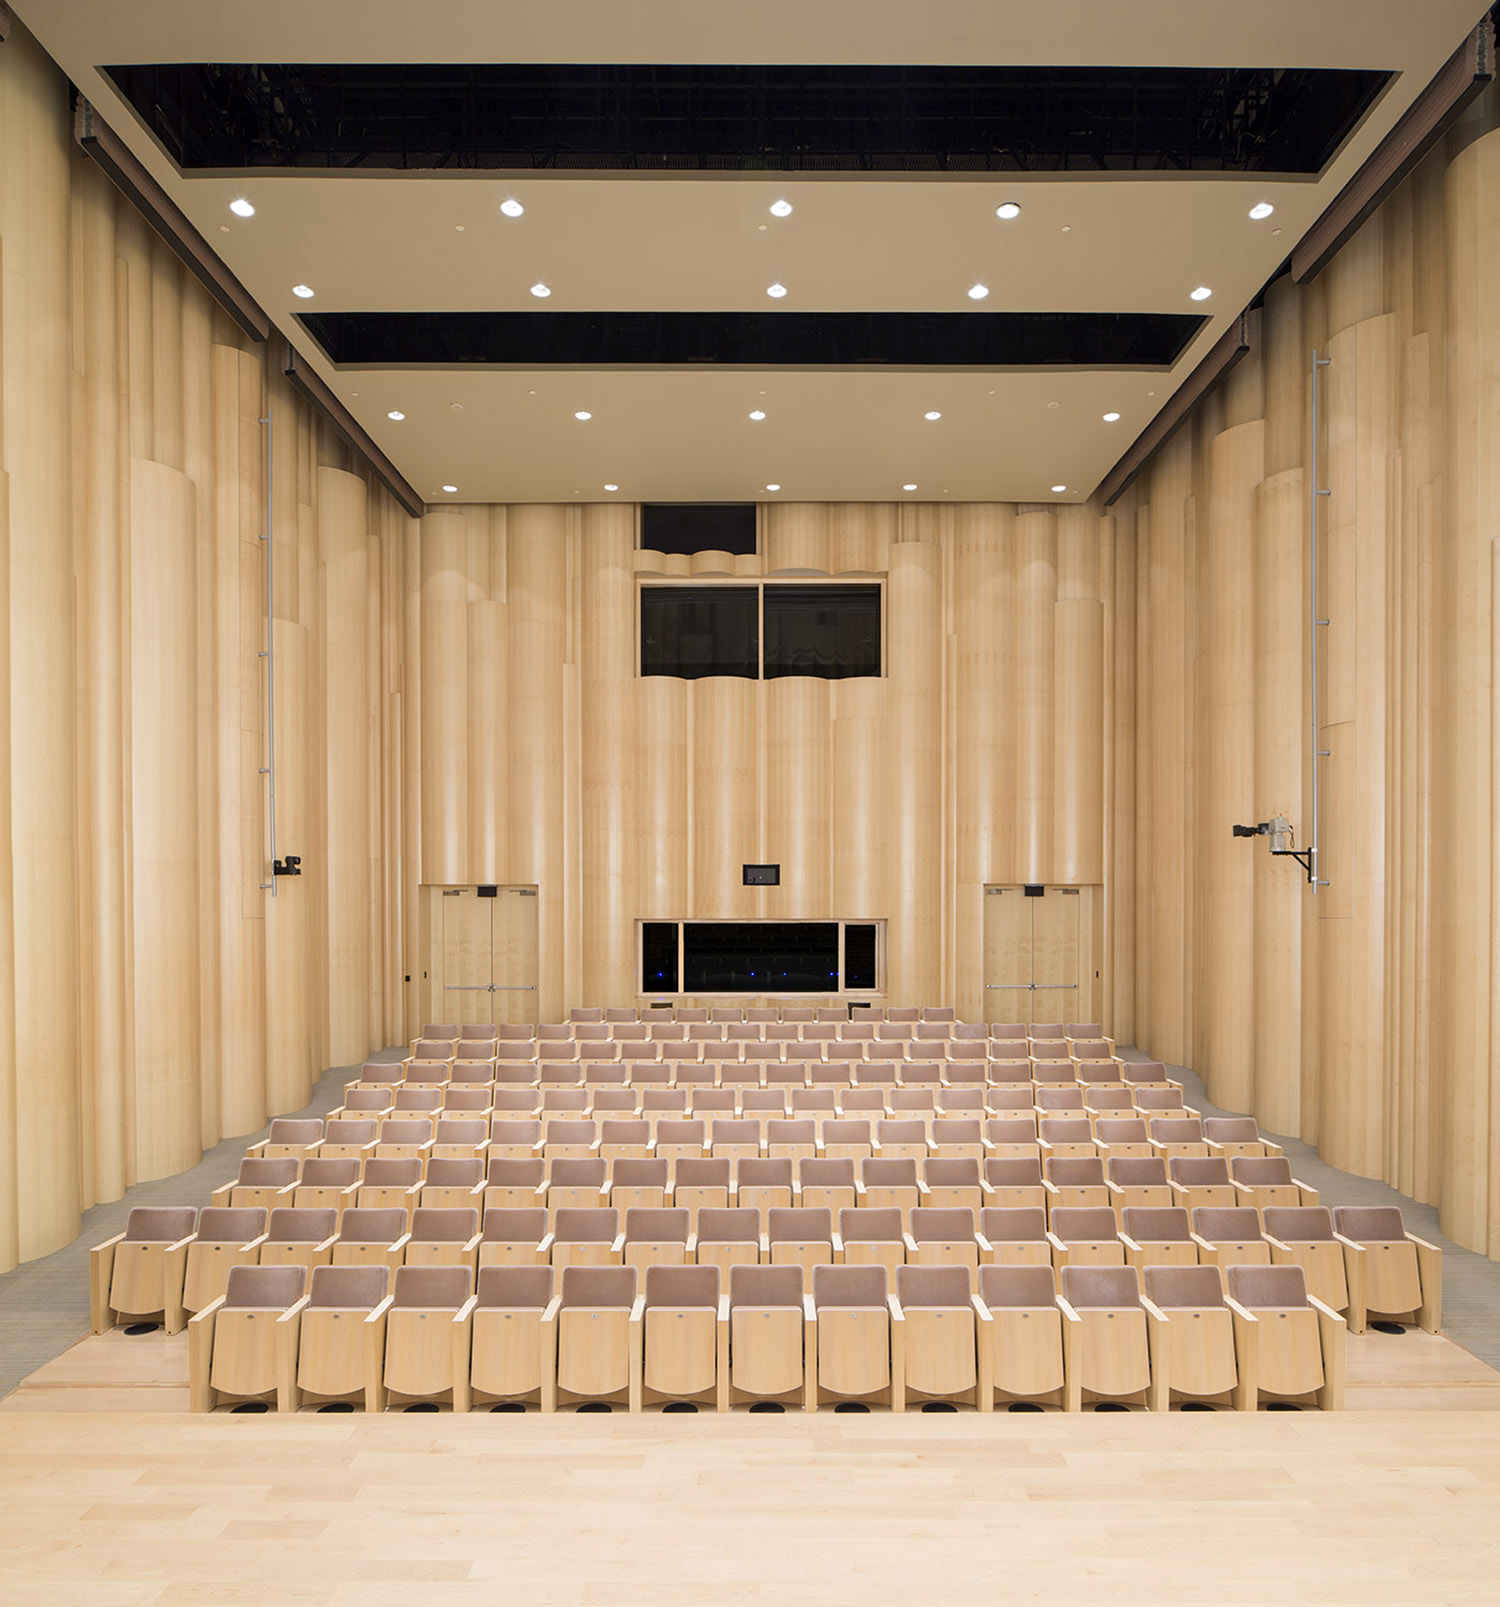 The 150-seat recital hall is an intimate space that unites performer and audience in a single volume. It is used for chamber music, recitals,poetry recitations, lectures and symposia 